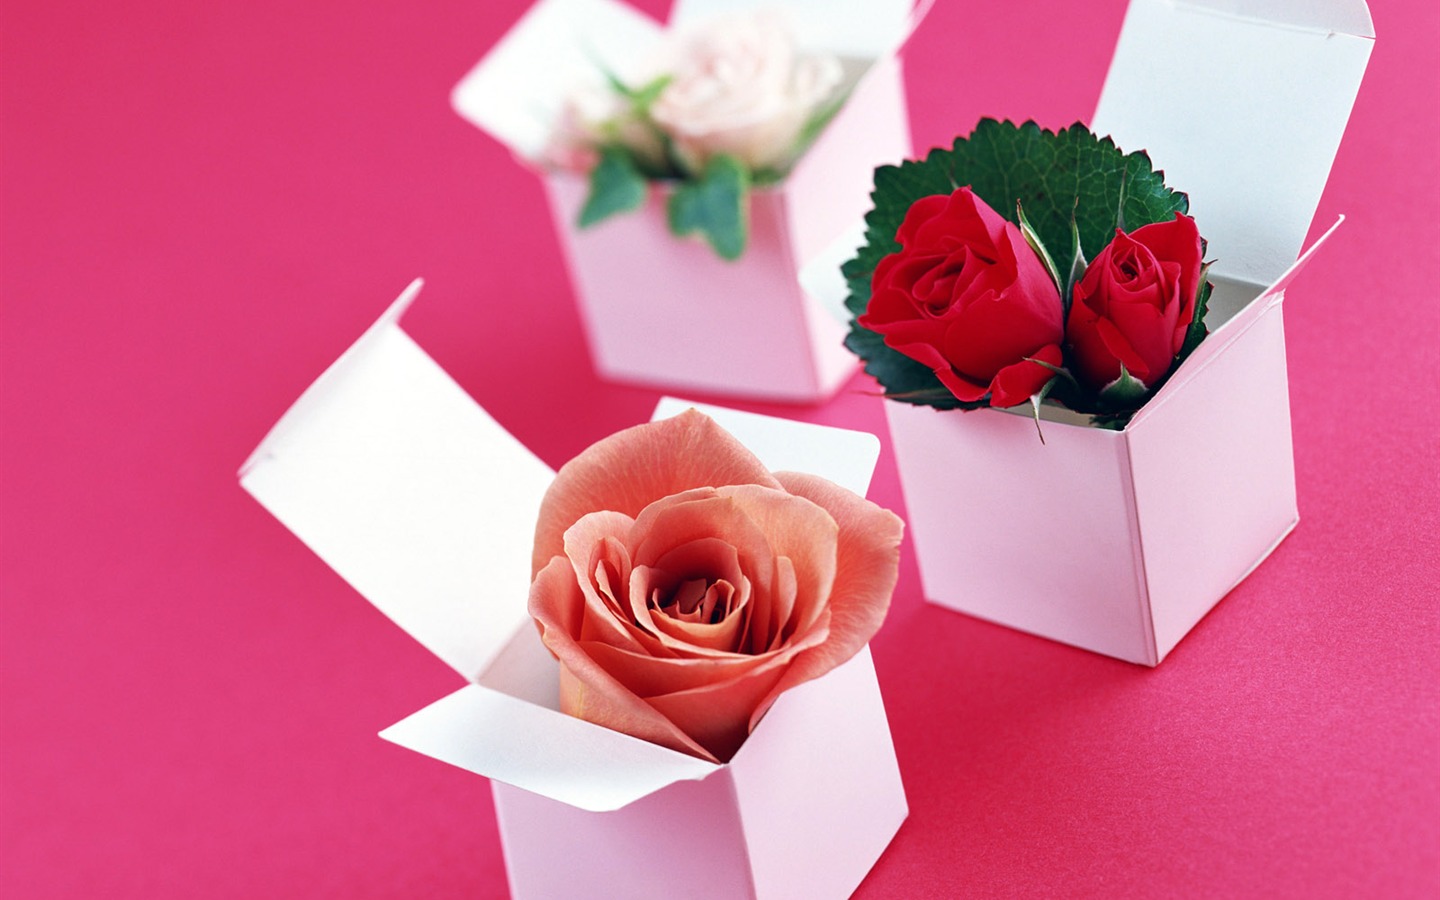 Flowers and gifts wallpaper (1) #1 - 1440x900